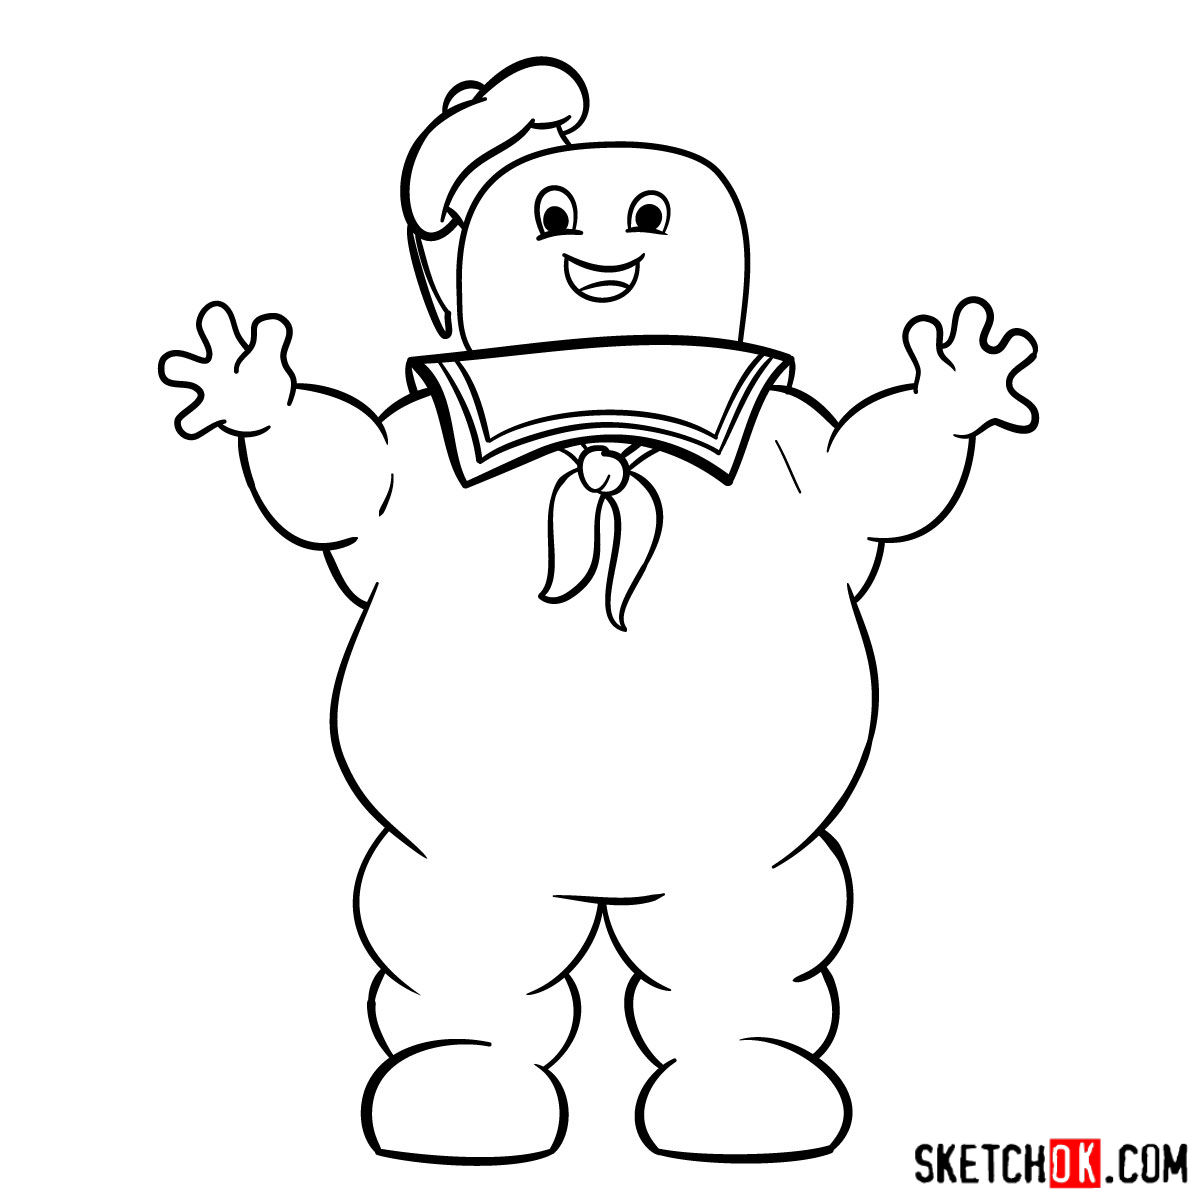 How to draw Stay Puft Marshmallow Man - step 10